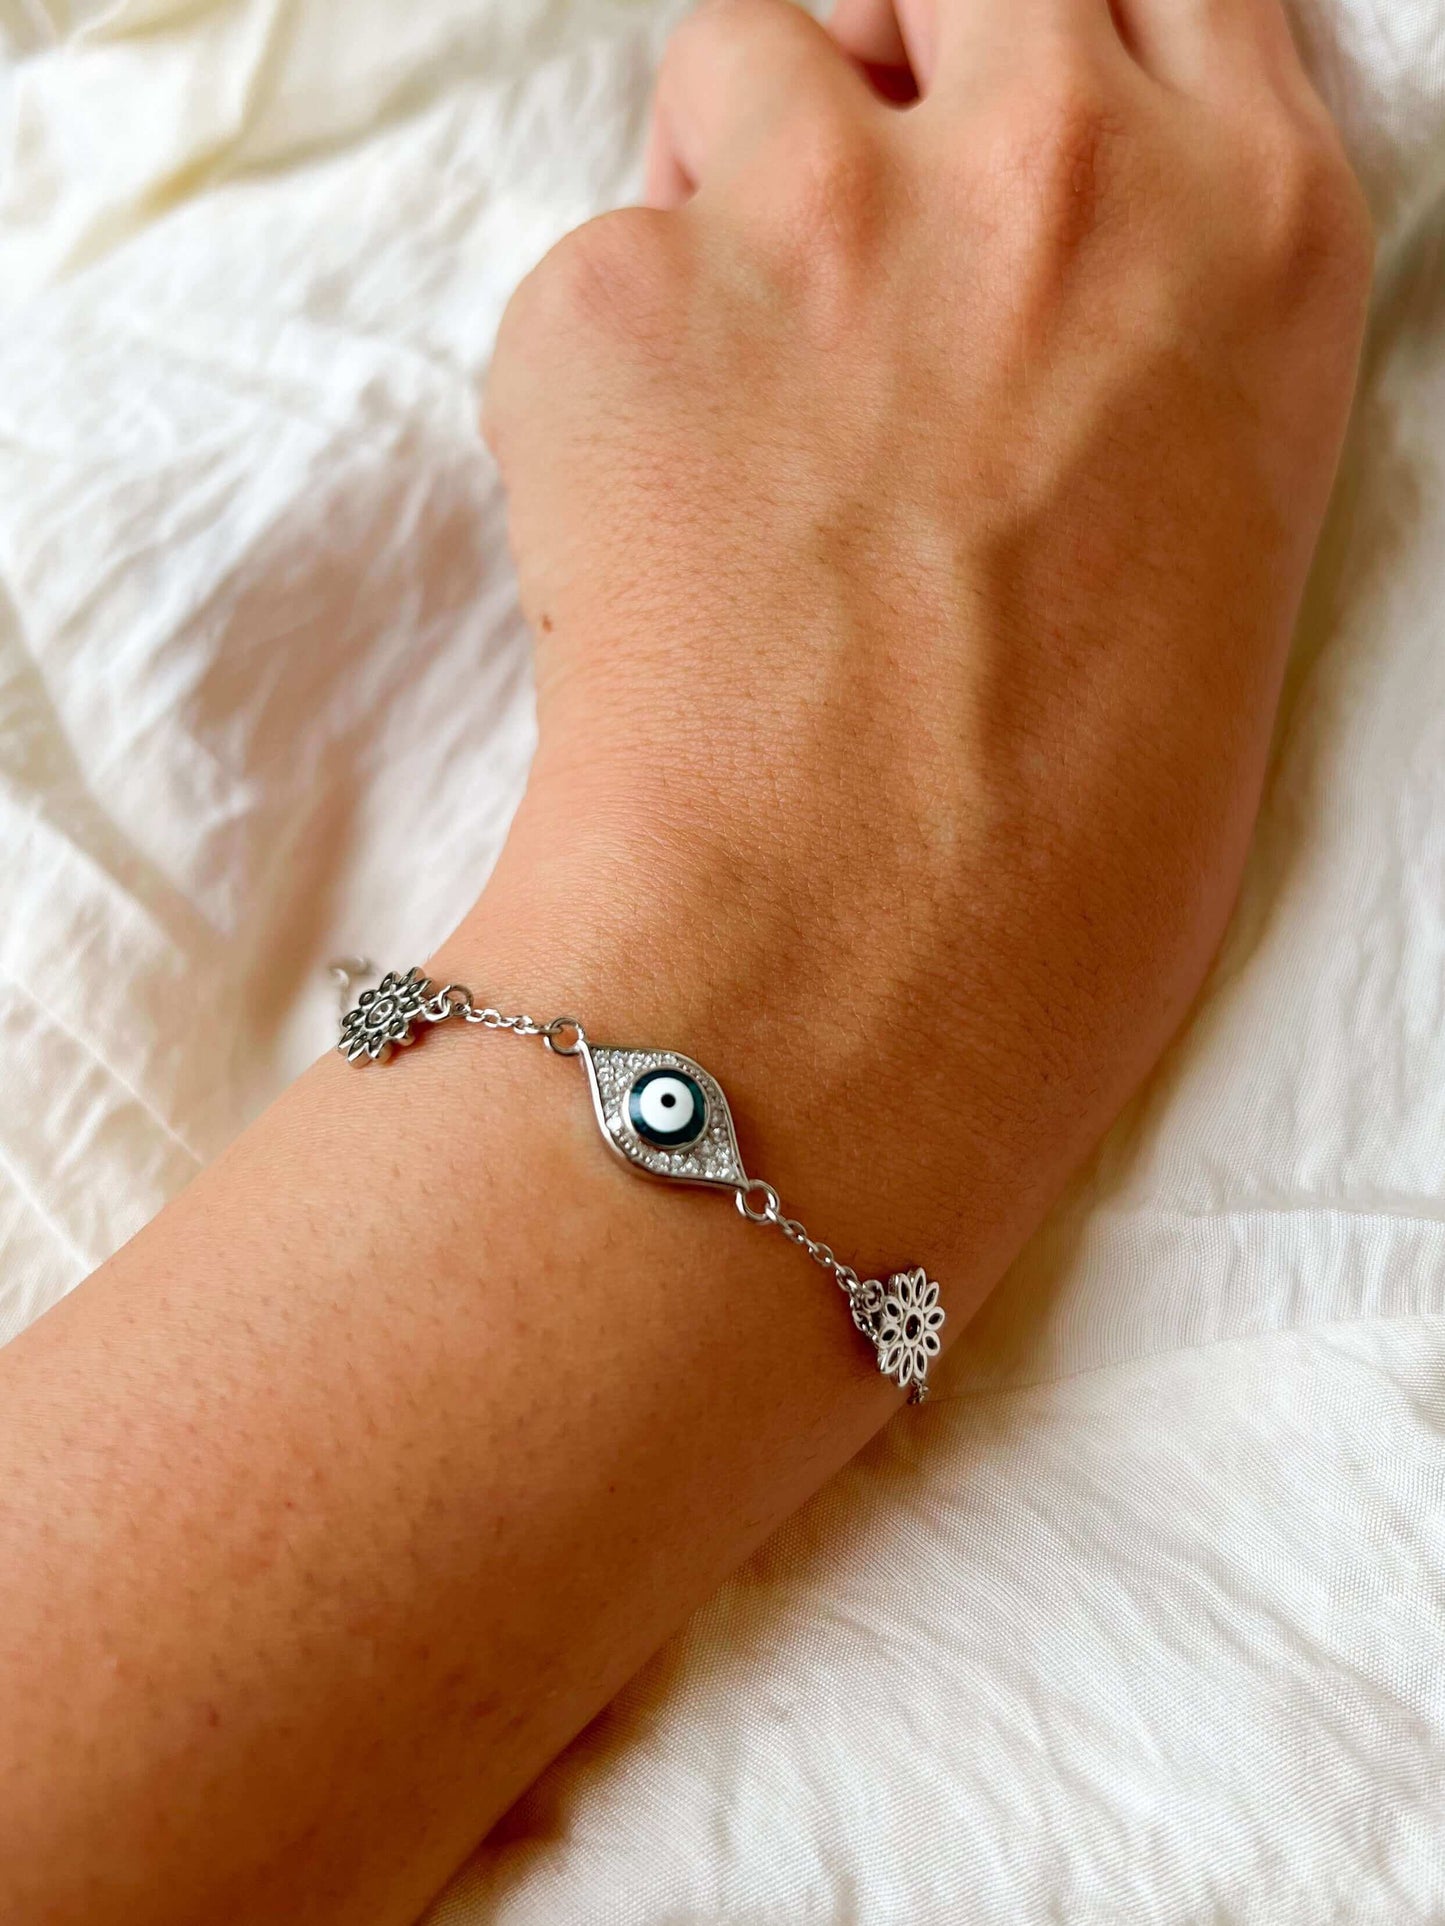 Talisman bracelet in silver with charms